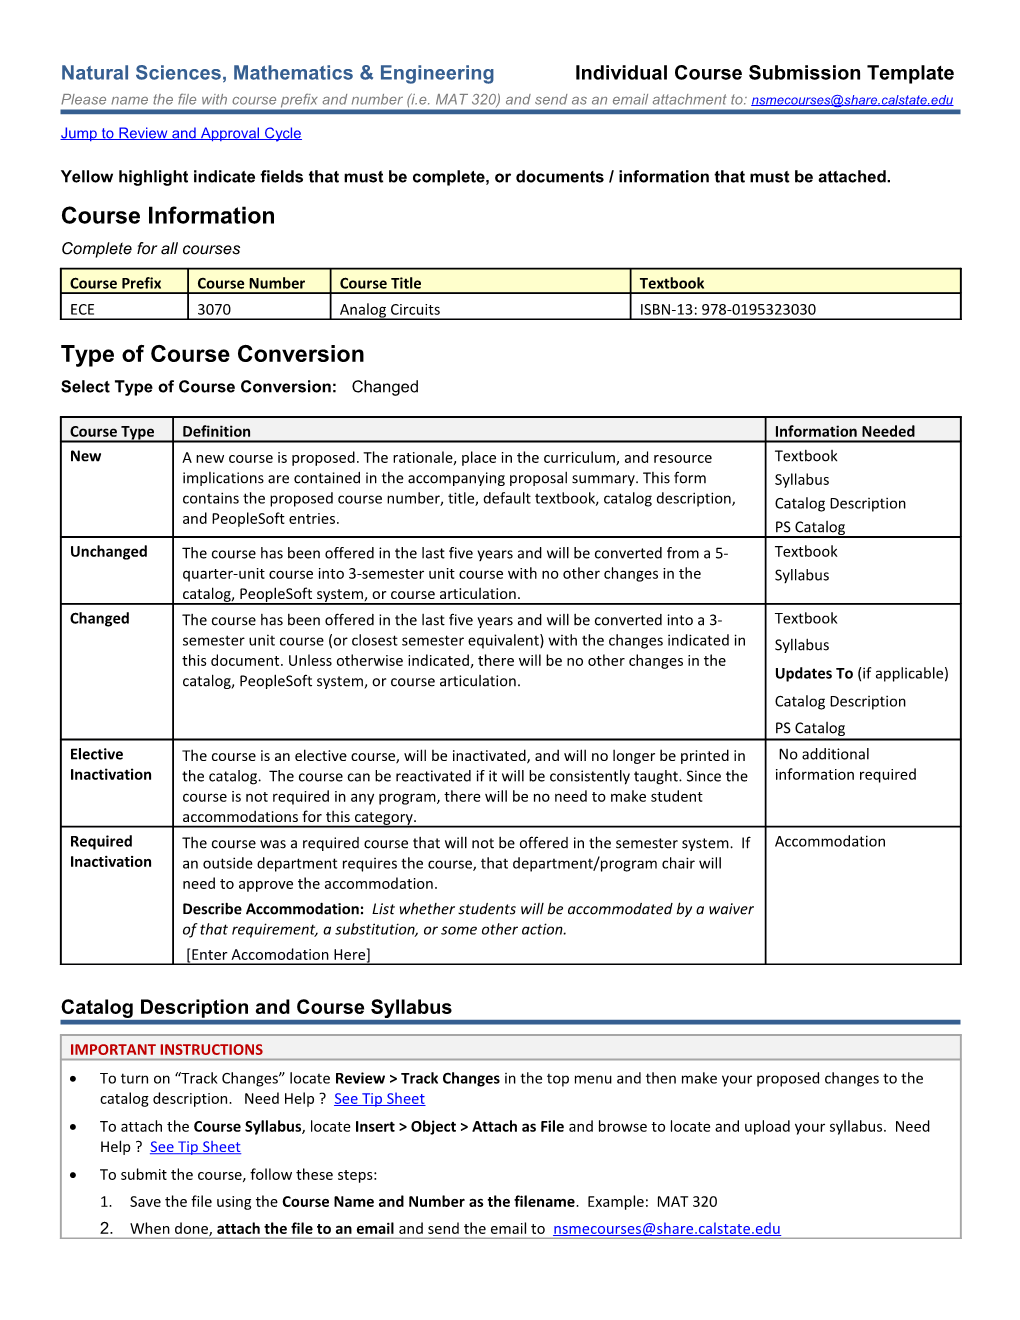 Natural Sciences, Mathematics & Engineering Individual Course Submission Template